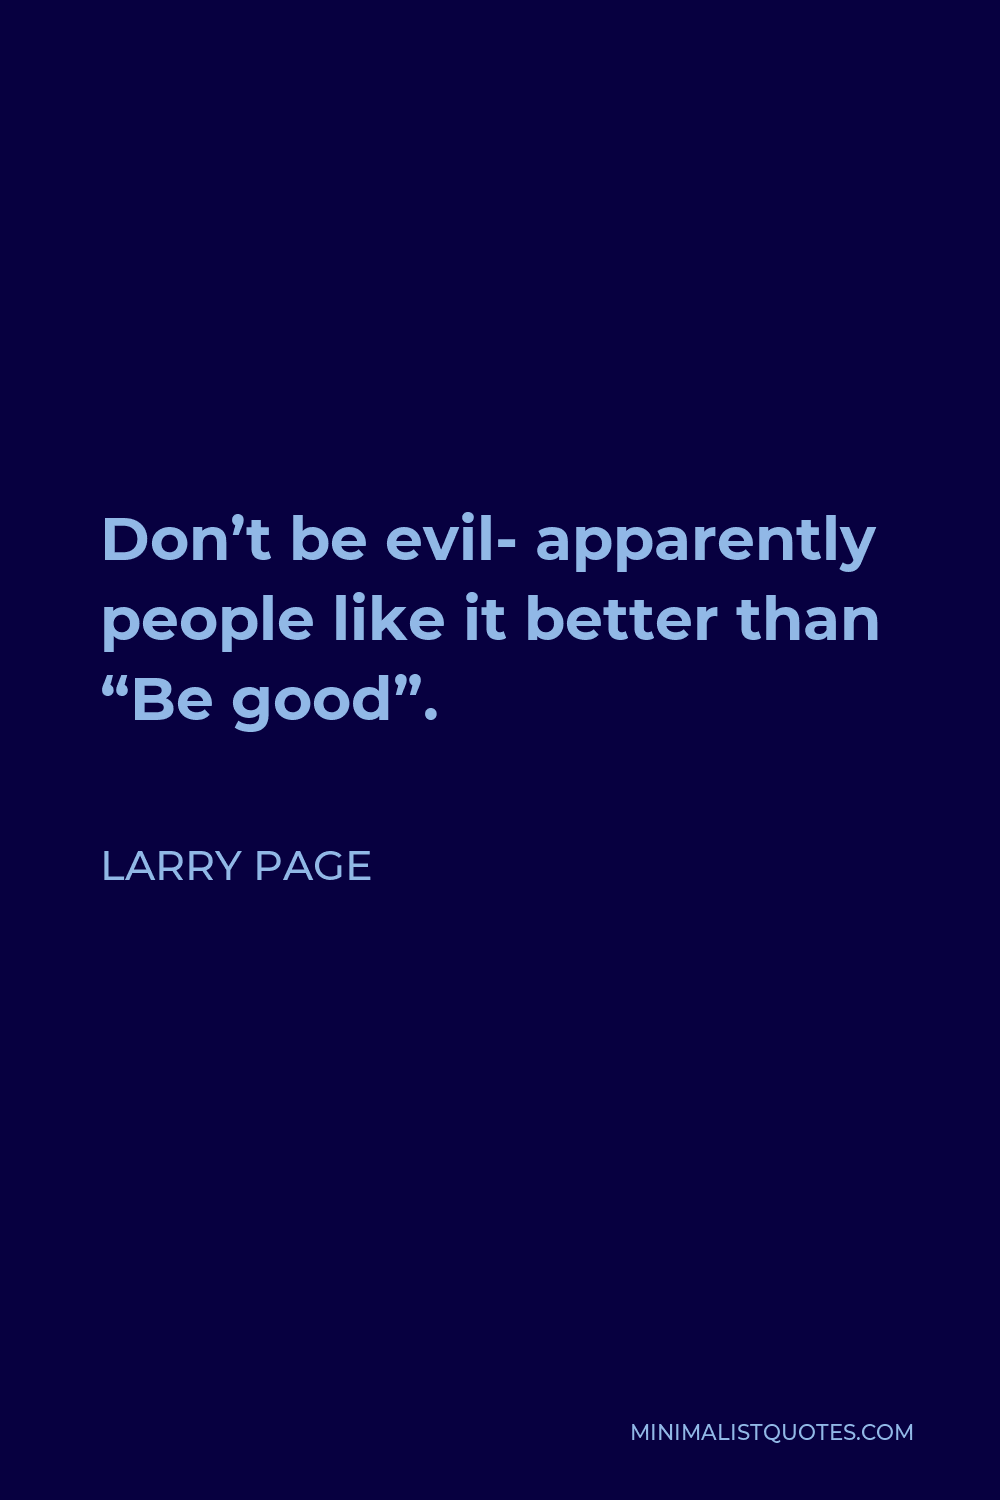 Larry Page Quote - Don’t be evil- apparently people like it better than “Be good”.